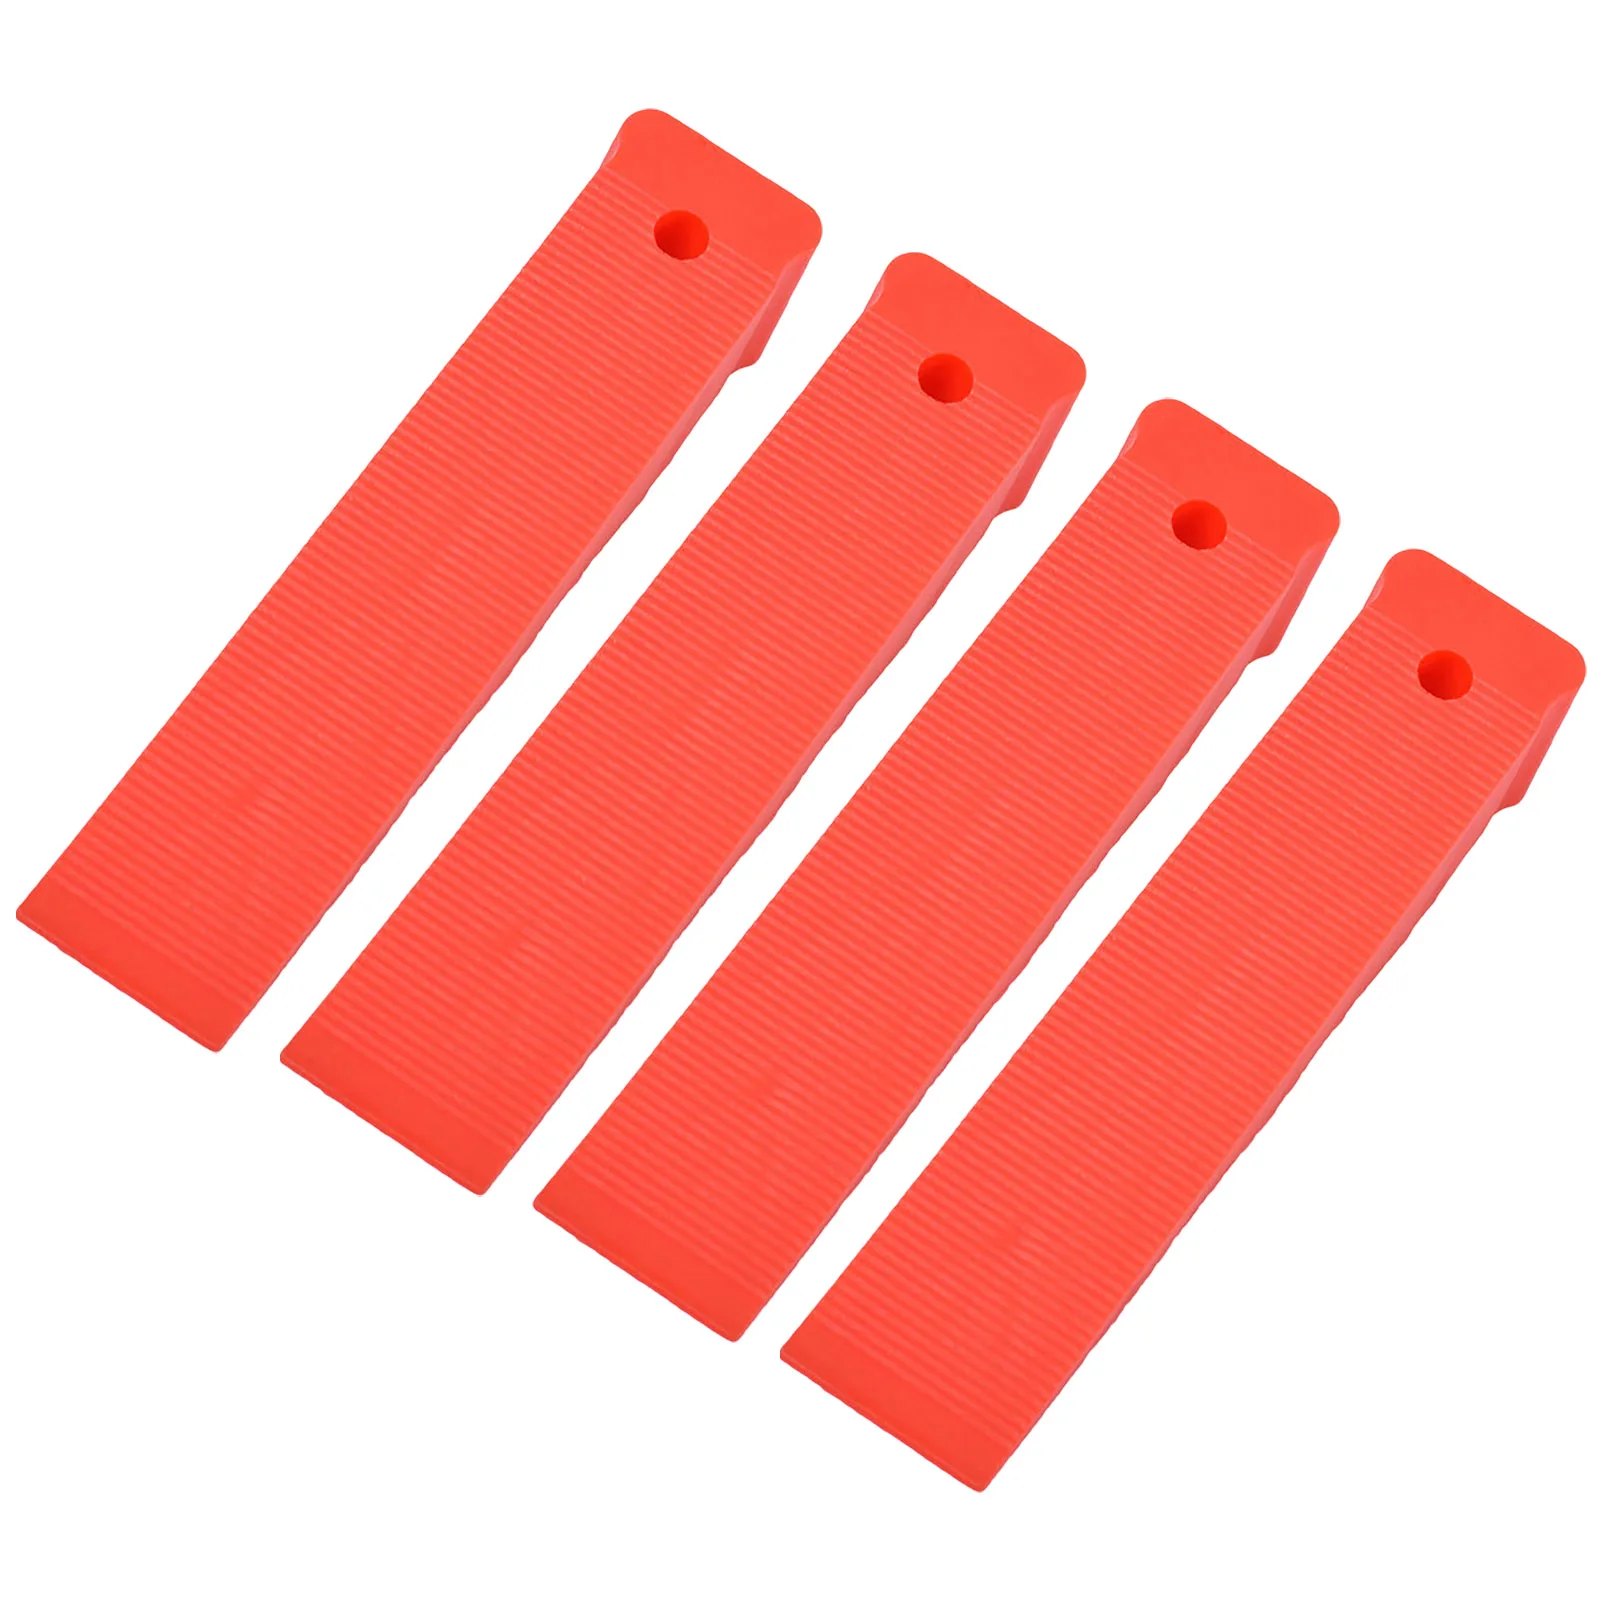 

Leveling Shims Wedges For Leveling Doors Or Windows House Construction Leveling Wedge Useful For Installation Of Doors And